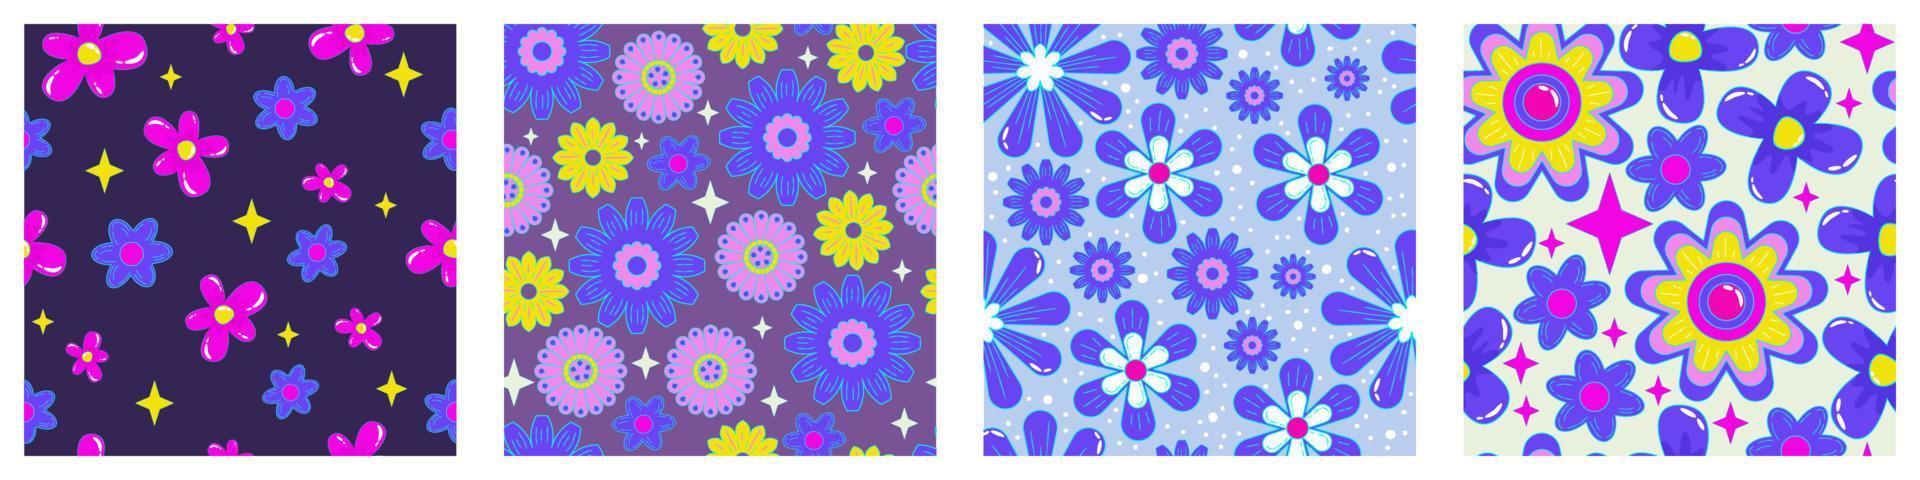 Flower power retro 1990s seamless pattern set with daisy for wallpaper design. Psychedelic print. Flower power. Trendy pop art retro floral pattern. Bright seamless design. vector